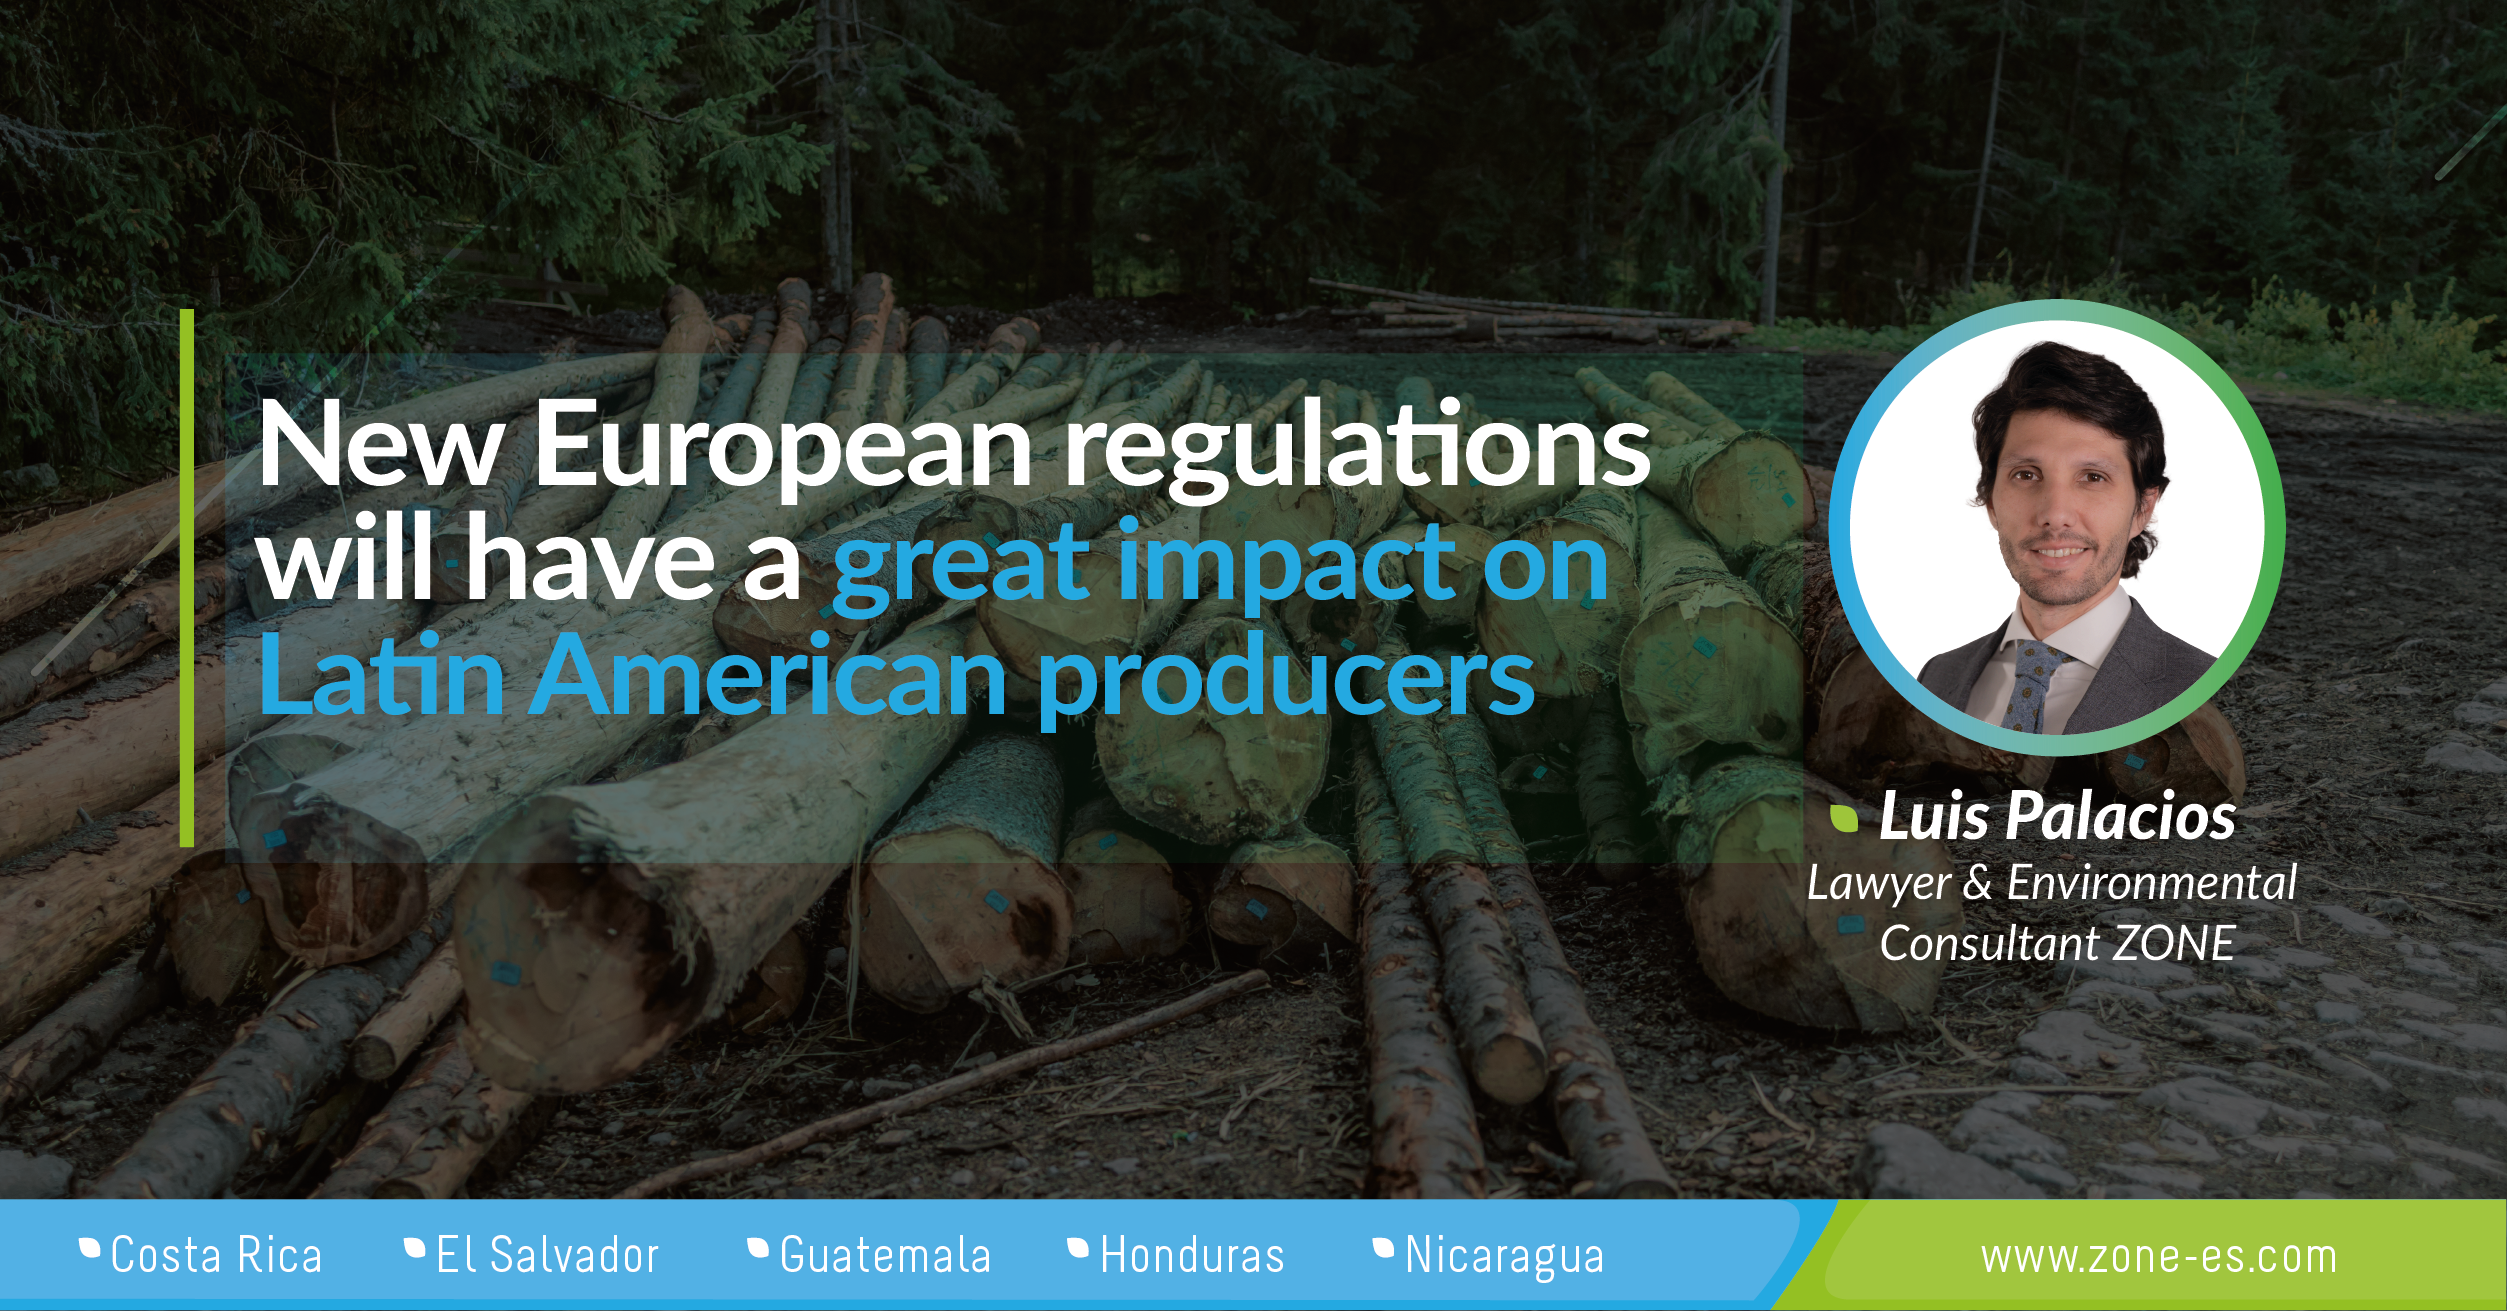 New European regulations will have a heavy impact on Latin American producers